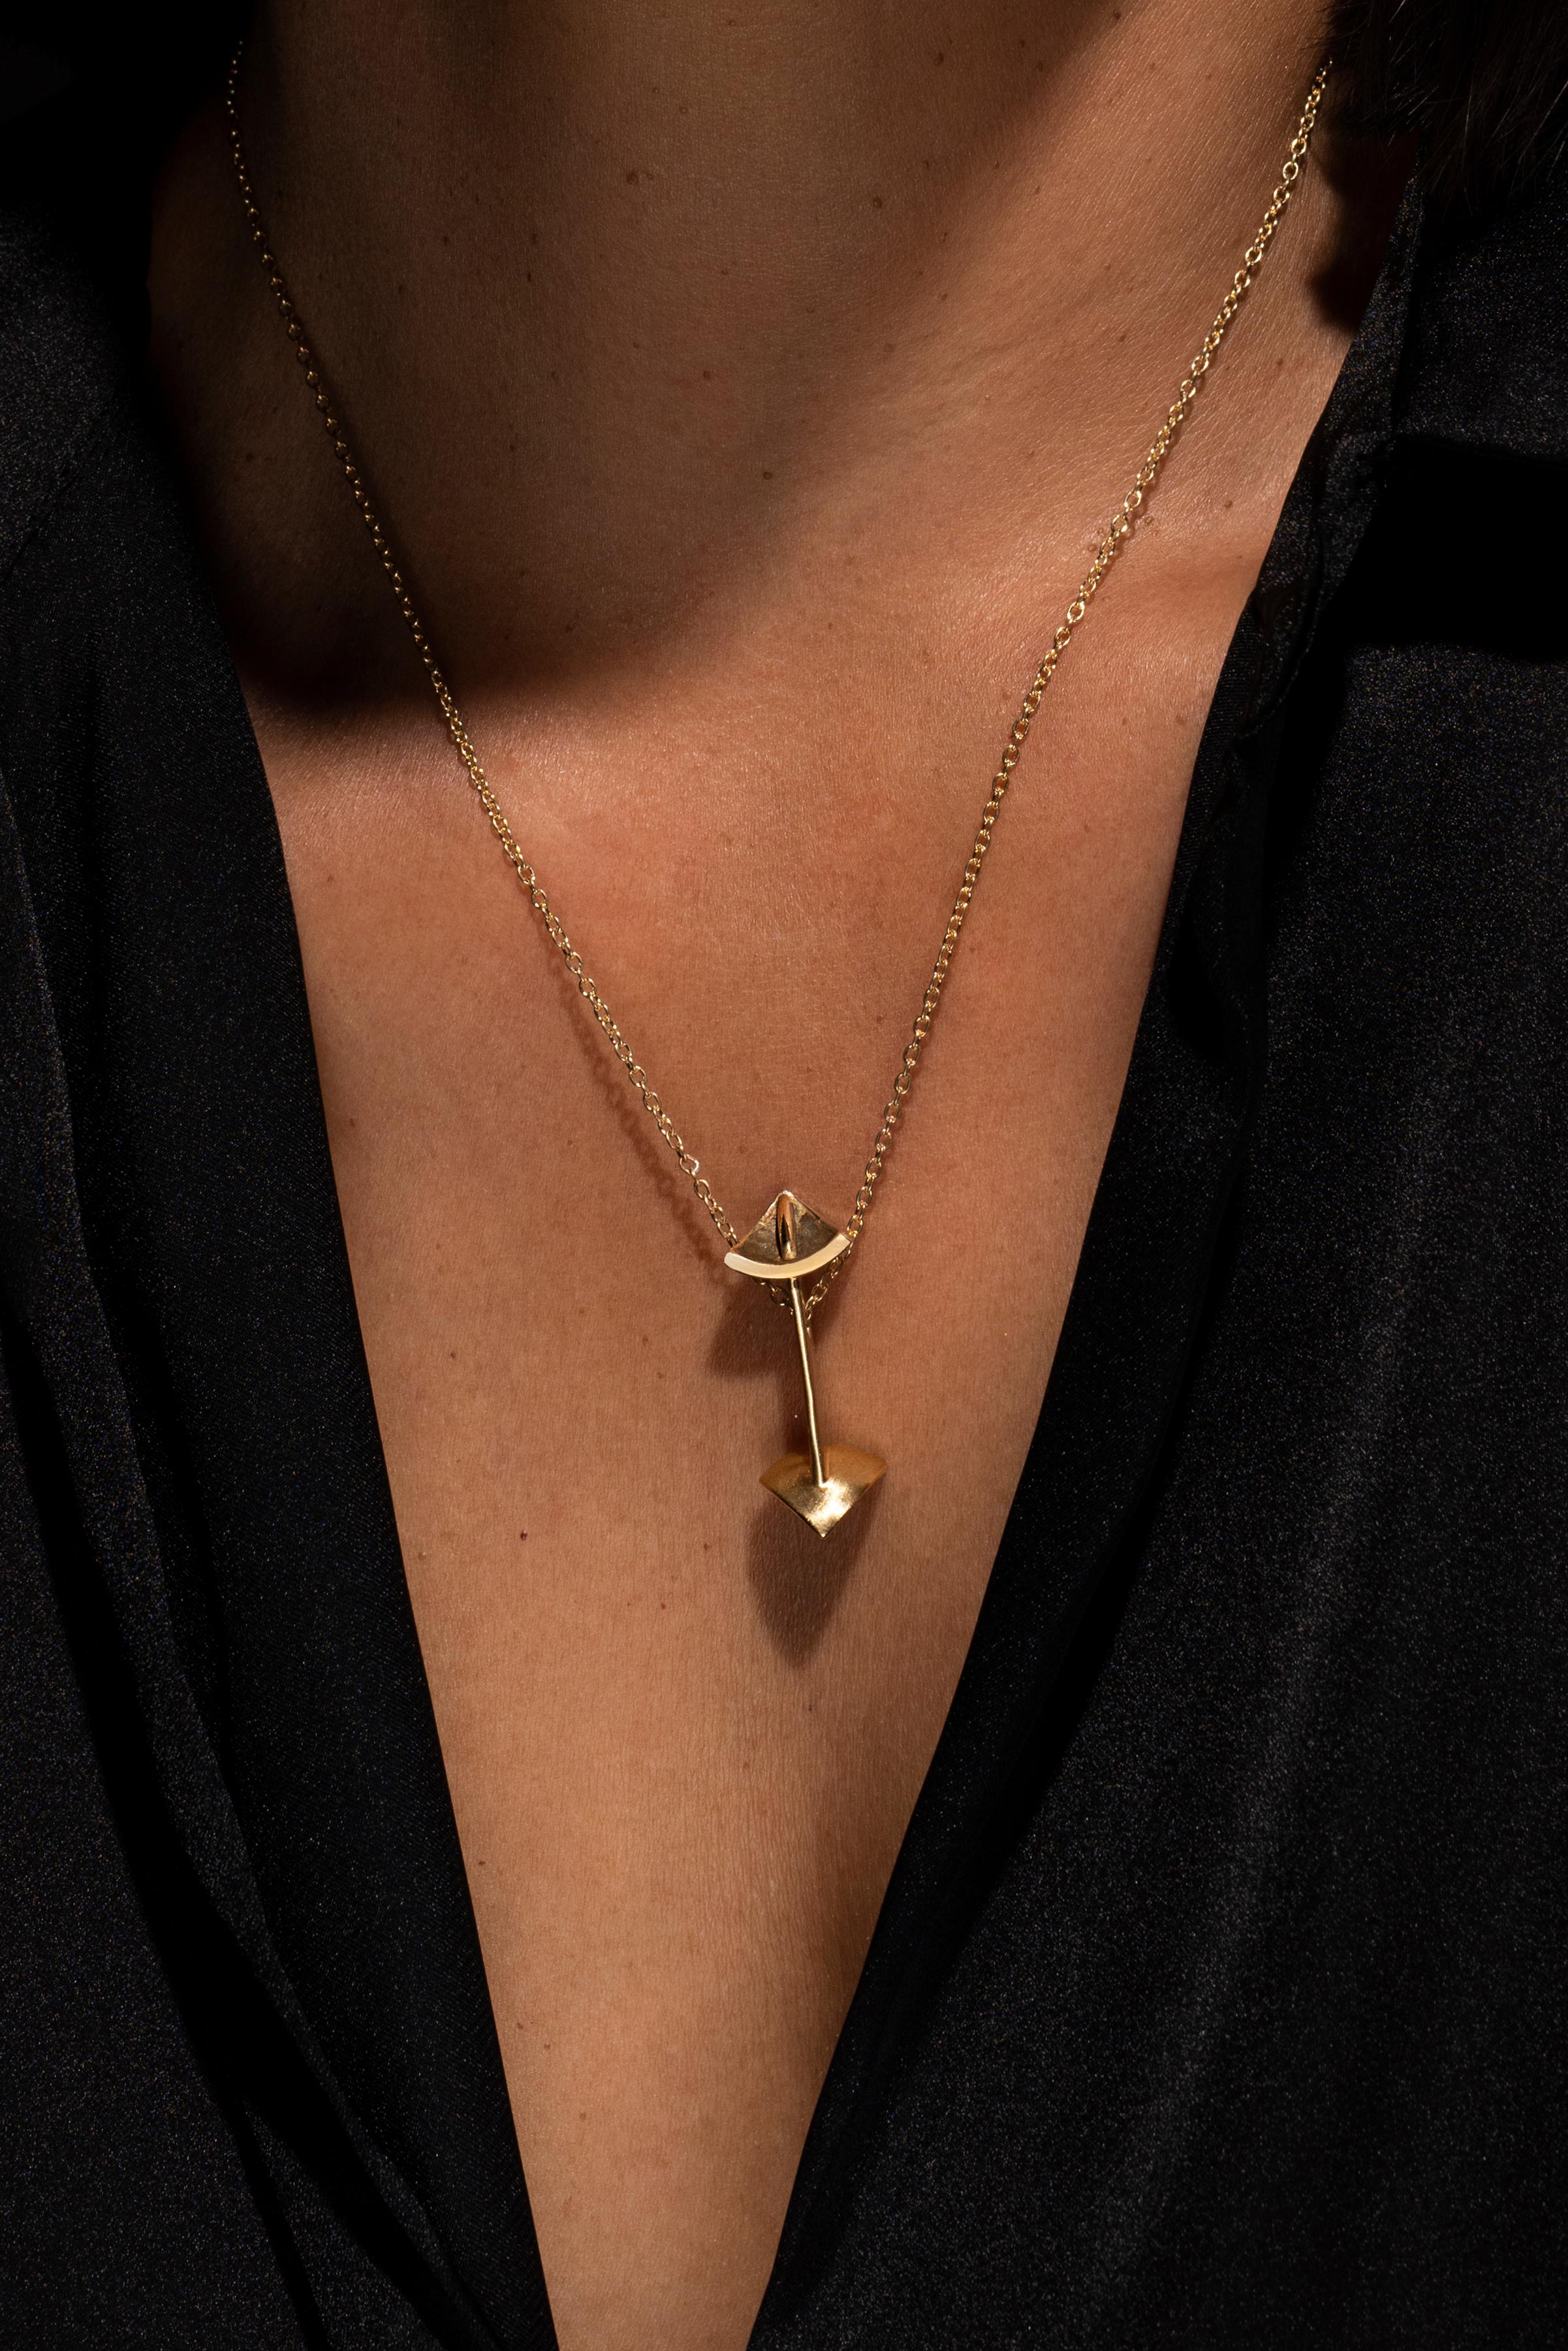 By Manjiro Zodiac Sagittarius Pendant Necklace In New Condition For Sale In Brooklyn, NY